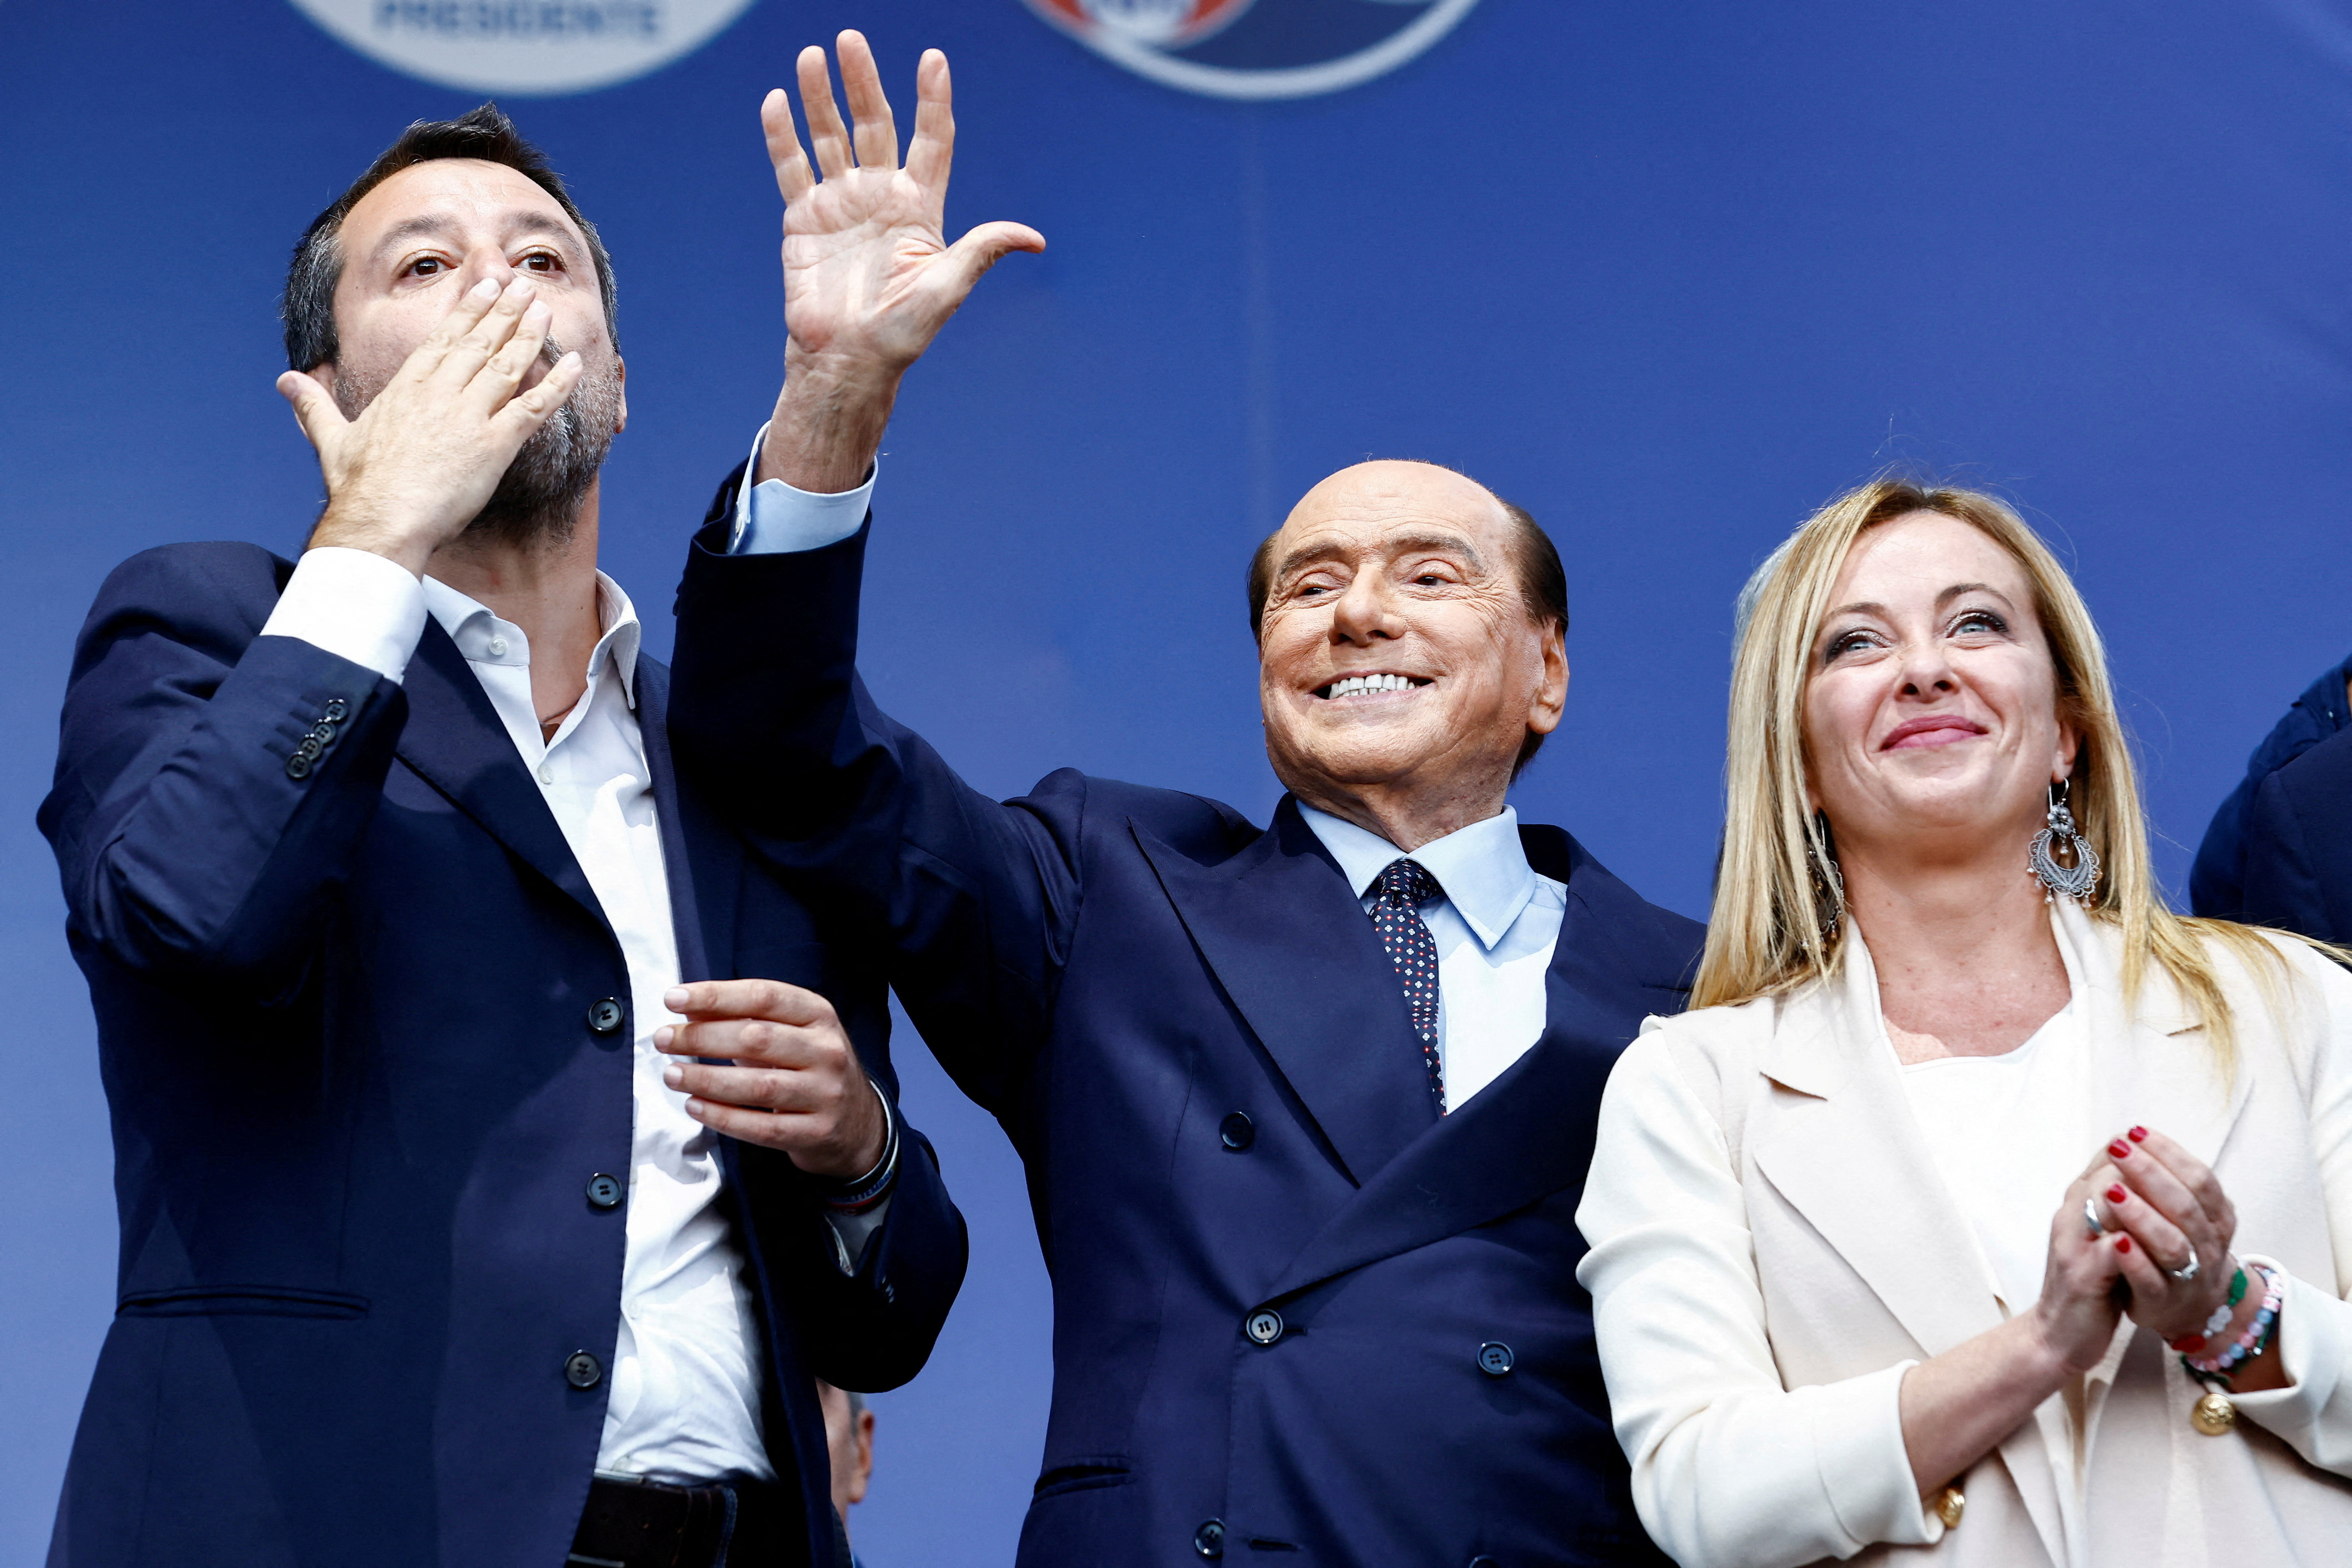 Italy's centre-right coalition closing campaign rally in Rome